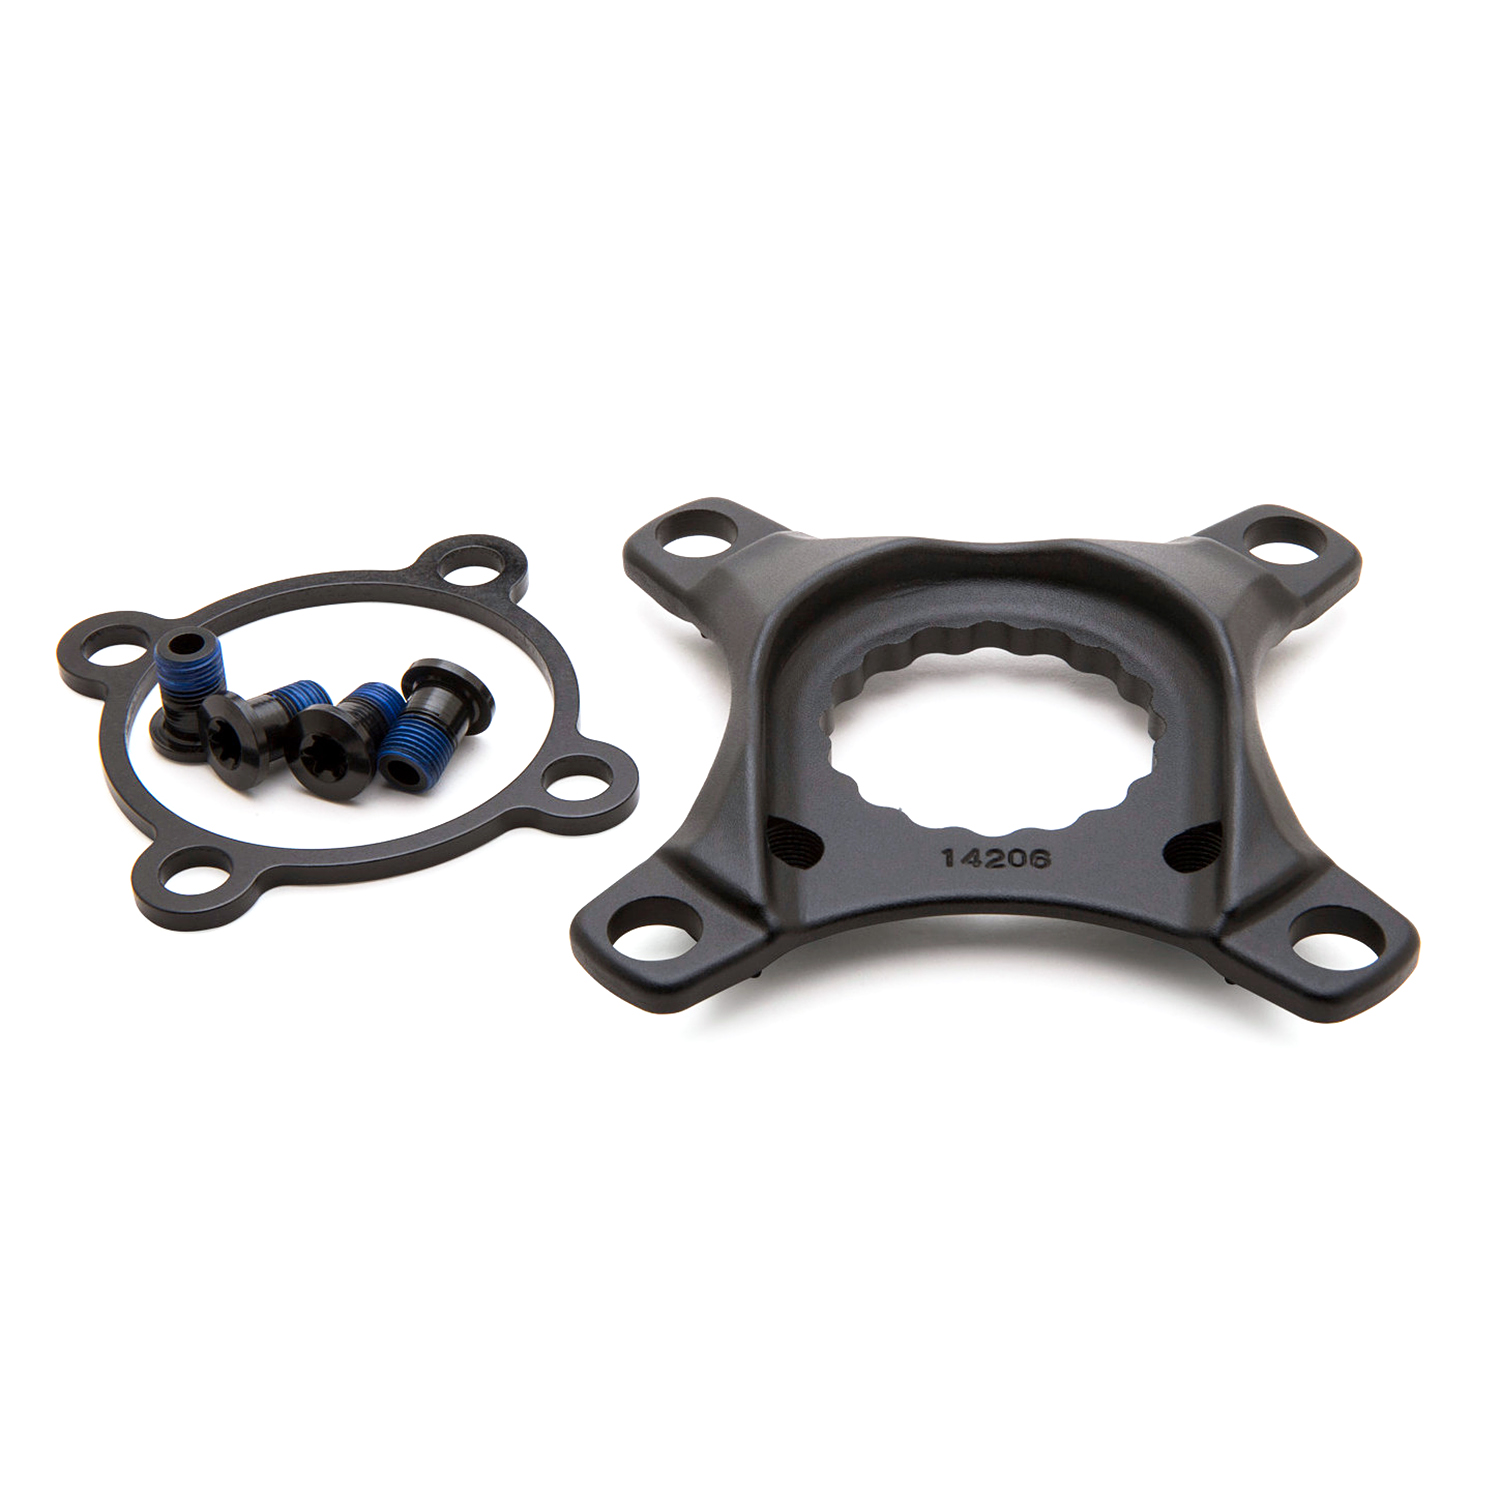 Race Face Cinch Spider  4 Bolt, for Sixc, 2x, 104 mm BCD